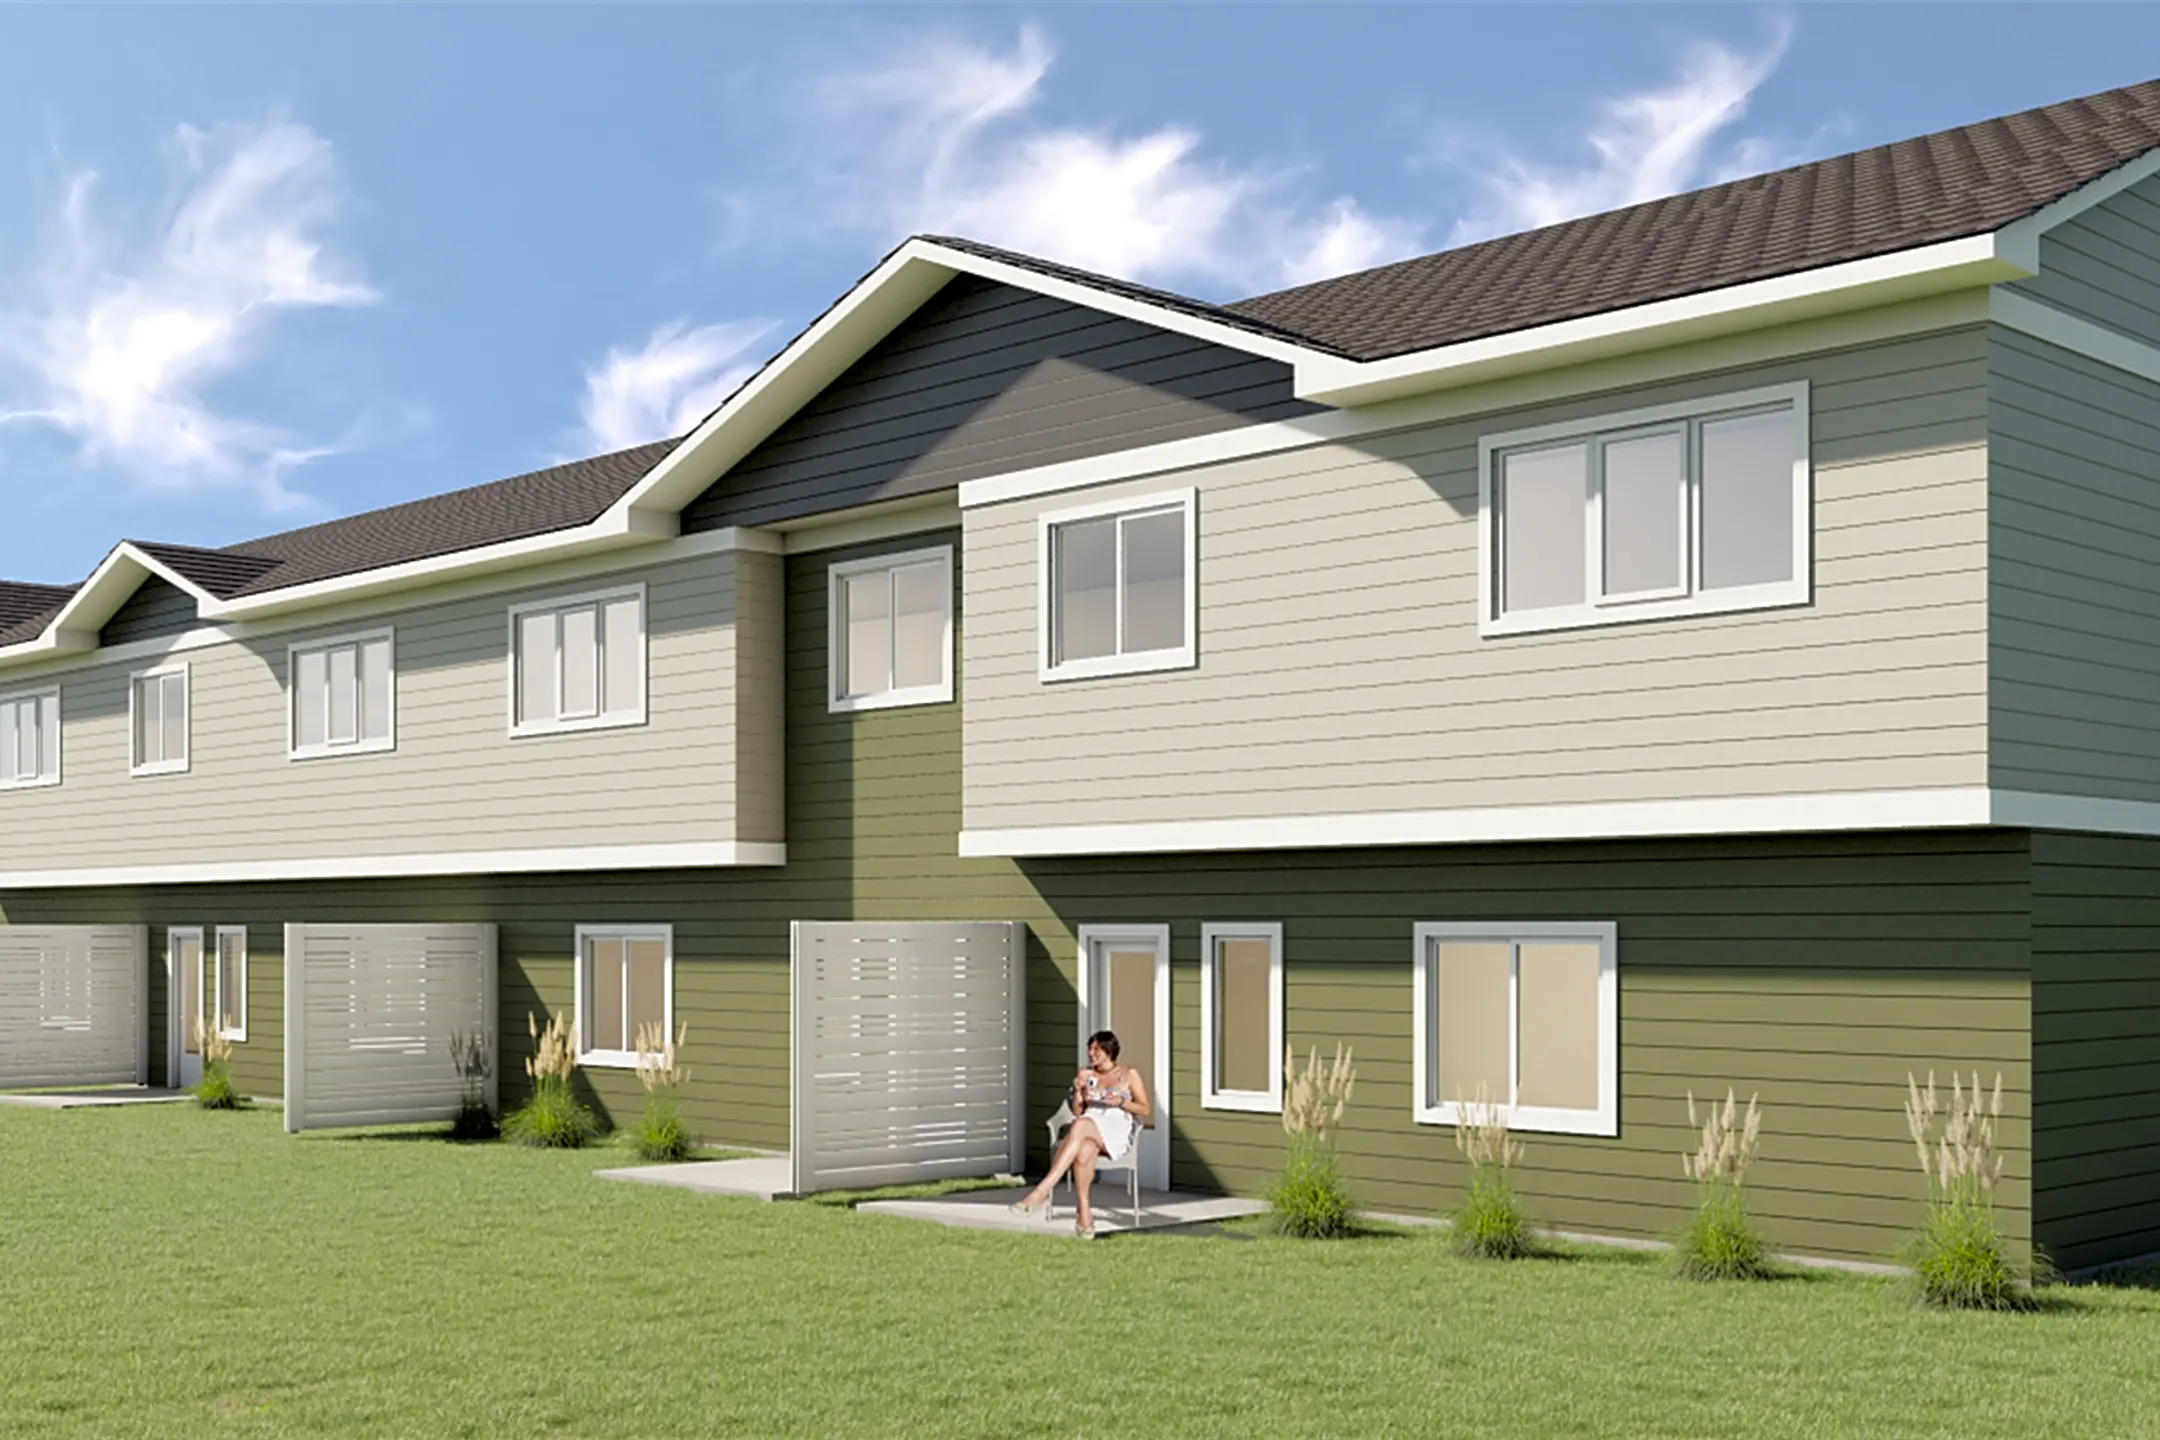 Building - Maple Pass Apartments & Townhomes - Hartford, SD